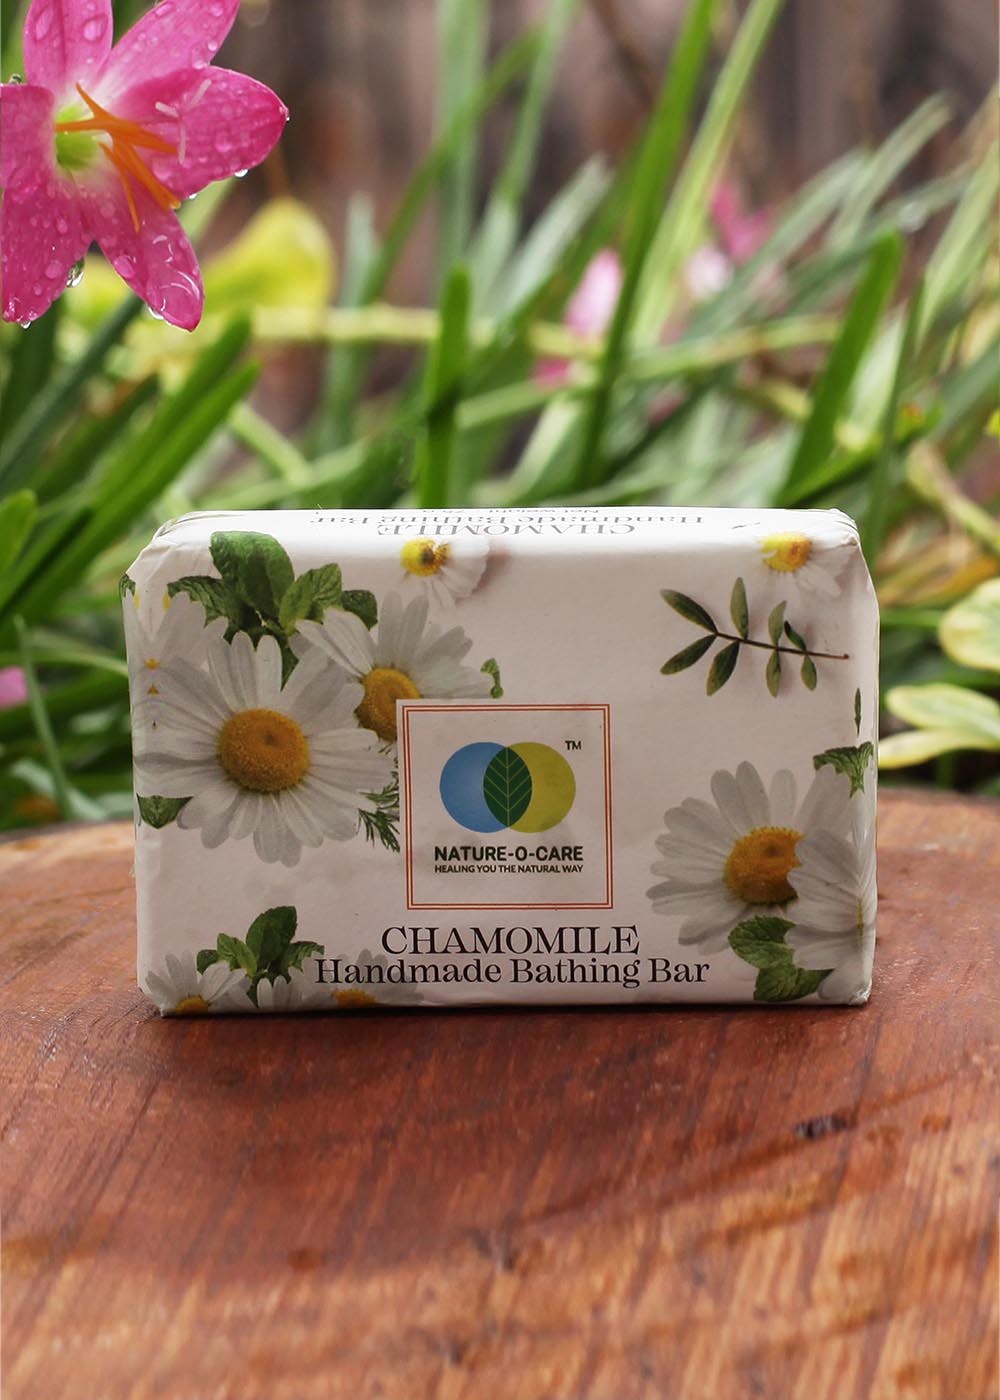 Chamomile Hand Made Bathing Bar - Pack of 2 (75gm Each)